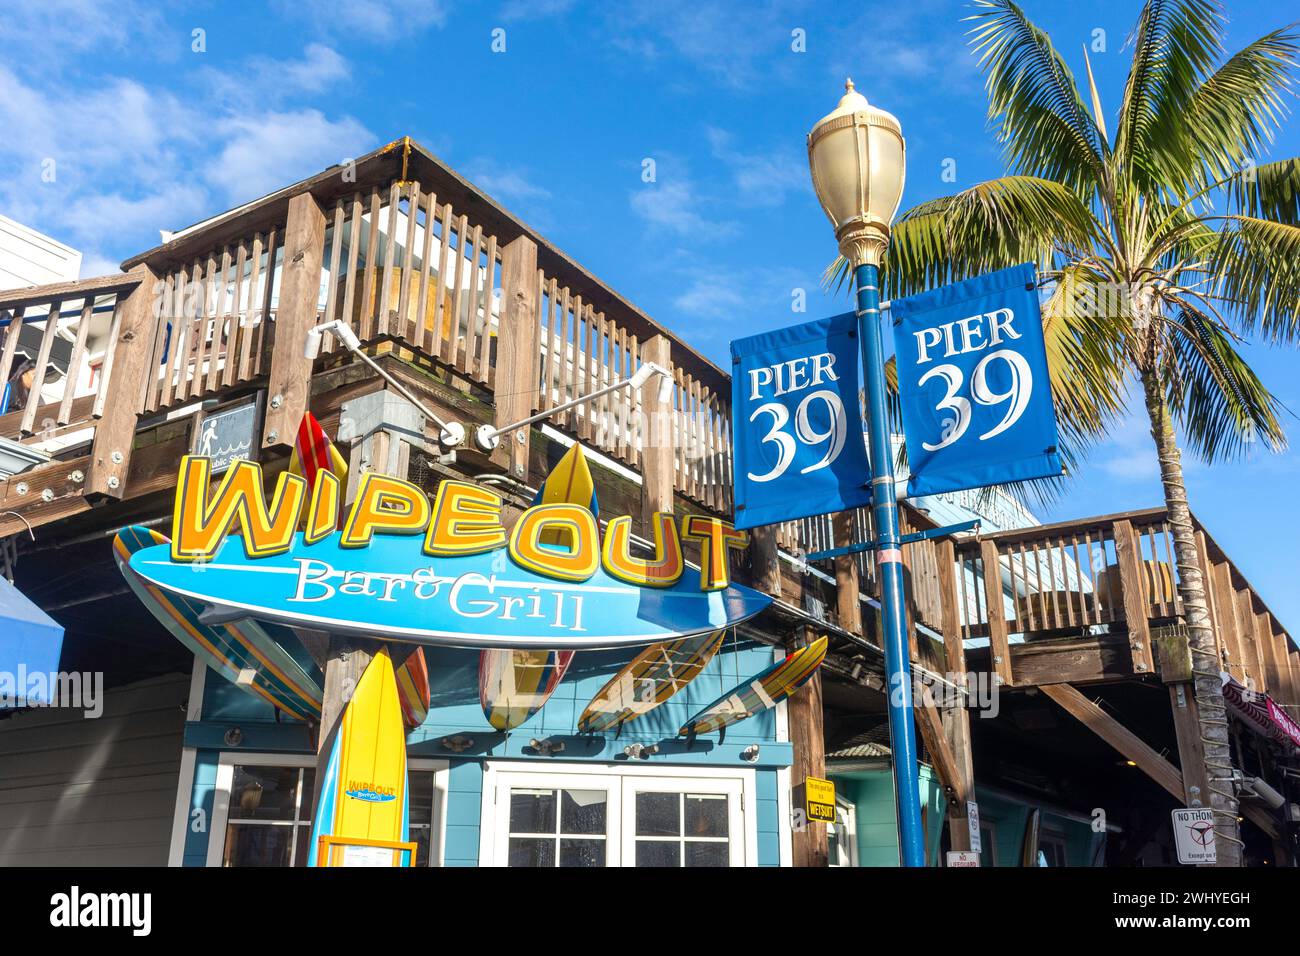 Wipeout Bar & Grill at Pier 39, Fisherman's Wharf District, San Francisco, California, United States Stock Photo